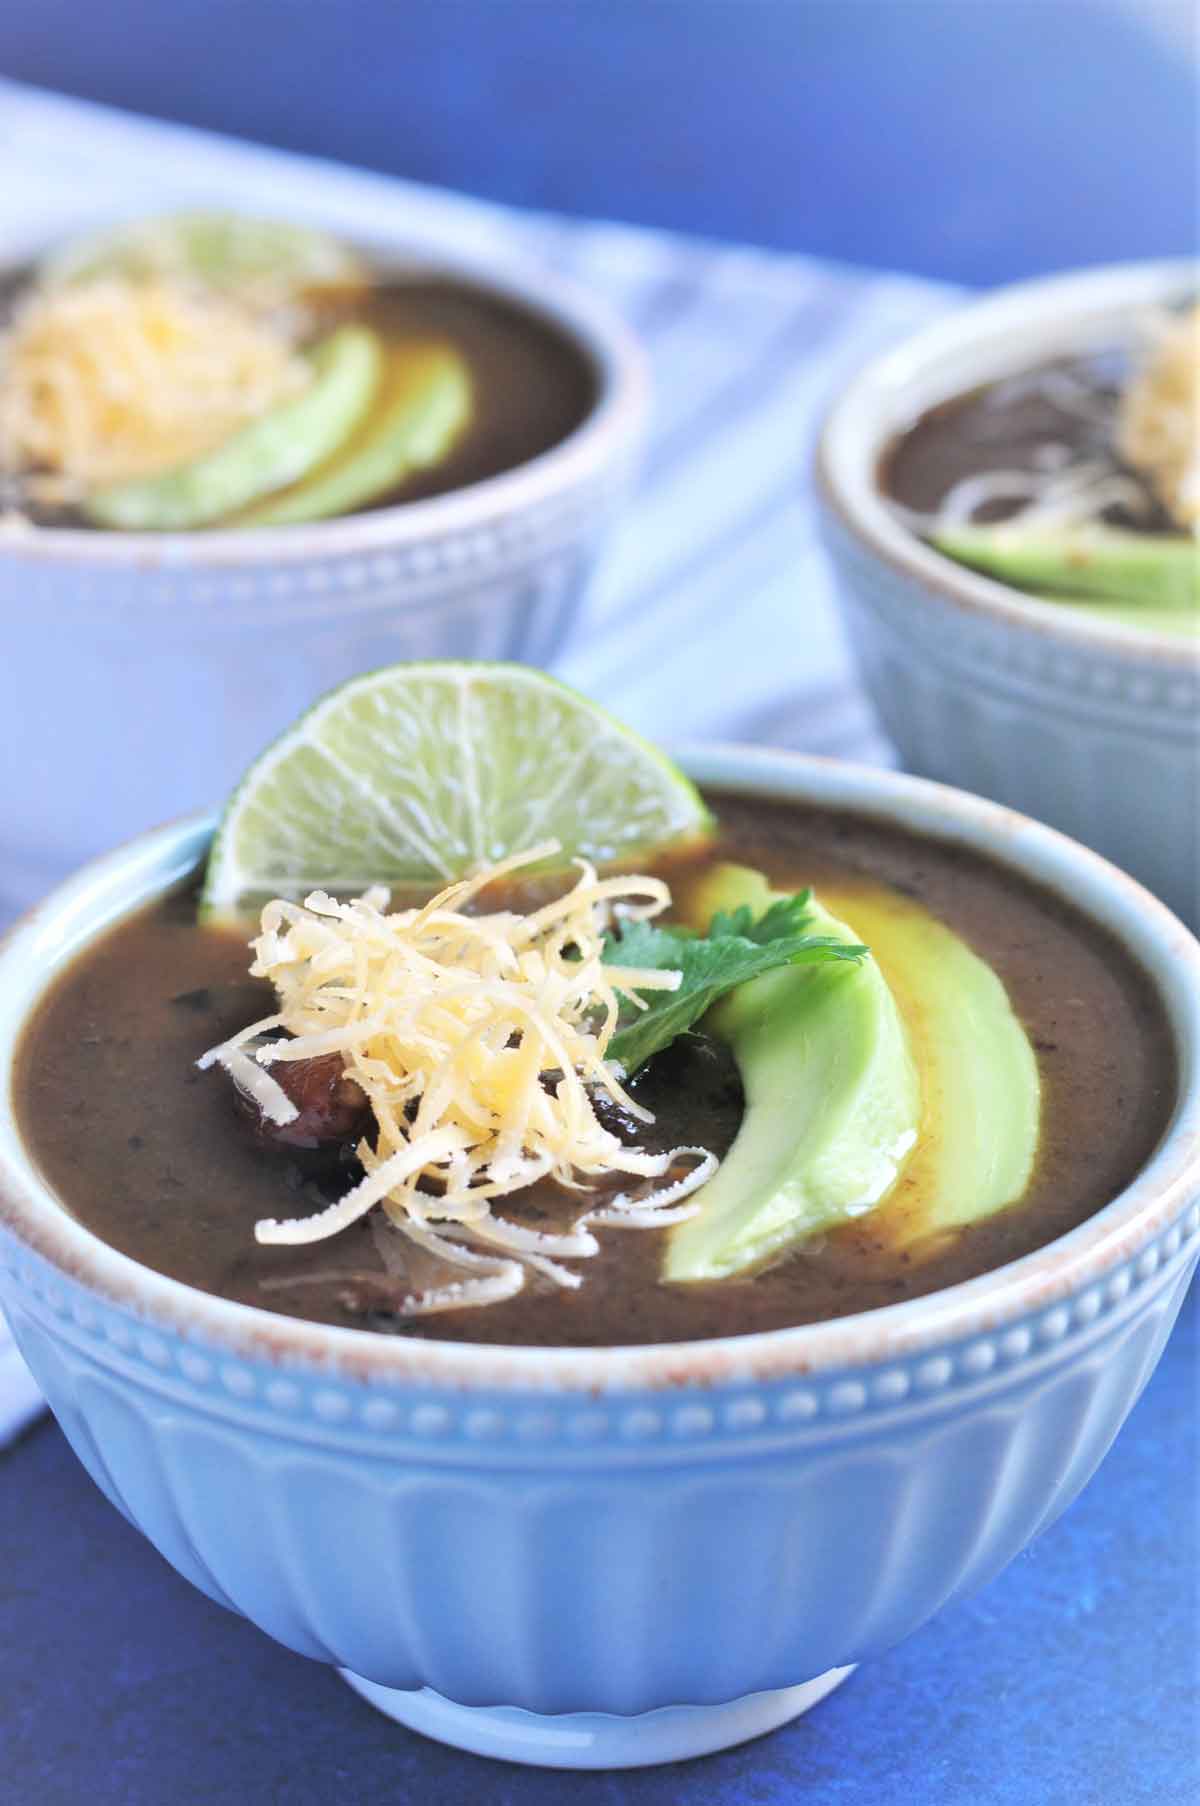 Black Beans Soup in a bowl and garnished with lemon, avacado slice and shredded cheddar cheese.